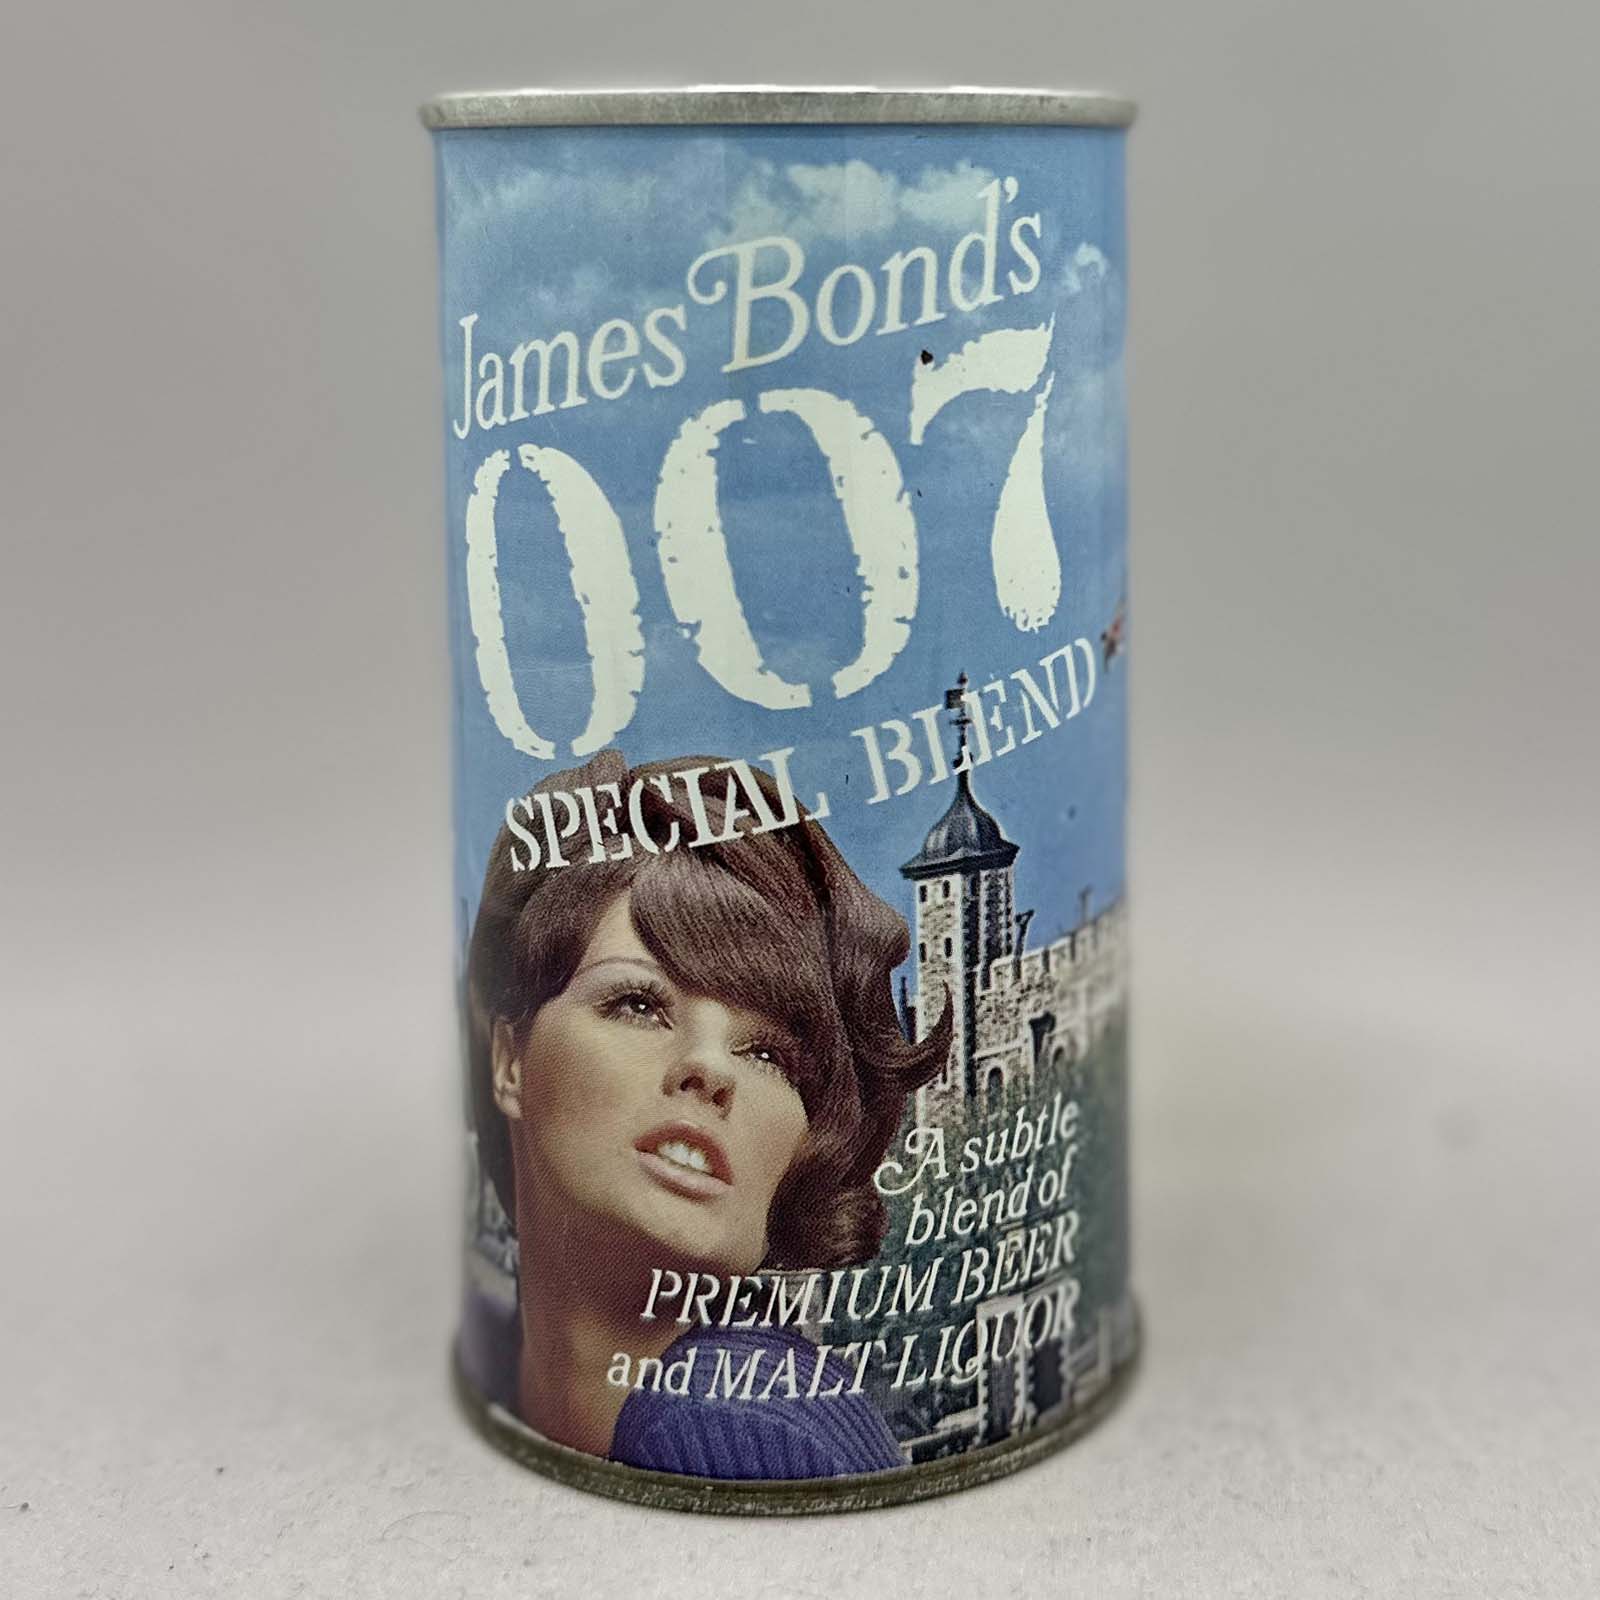 007 82-28 pull tab beer can 1